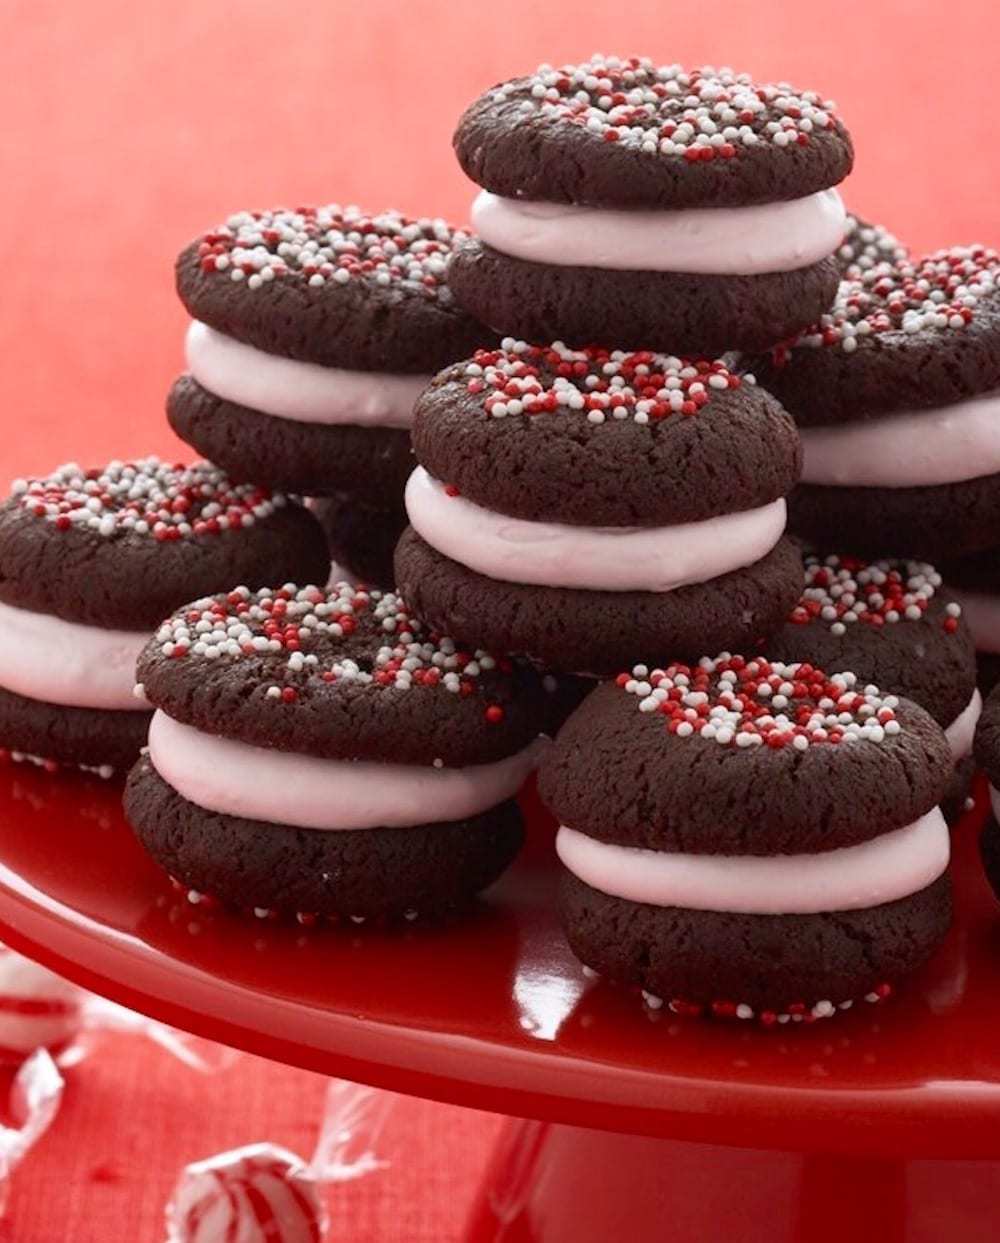 Peppermint Marshmallow Sandwich Cookies on red cake plate